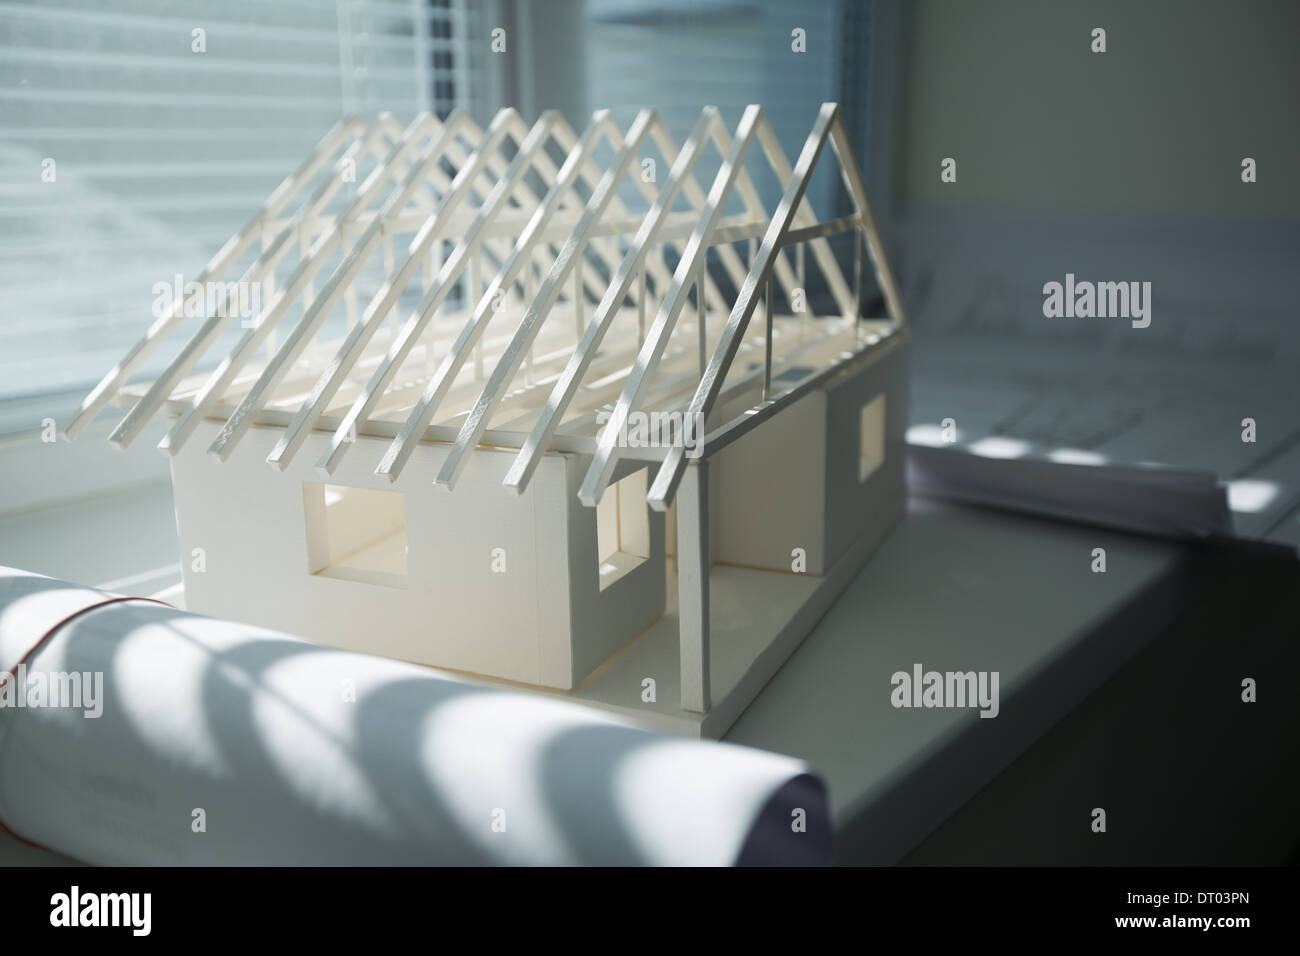 Model of a house made from paper standing at the window Stock Photo